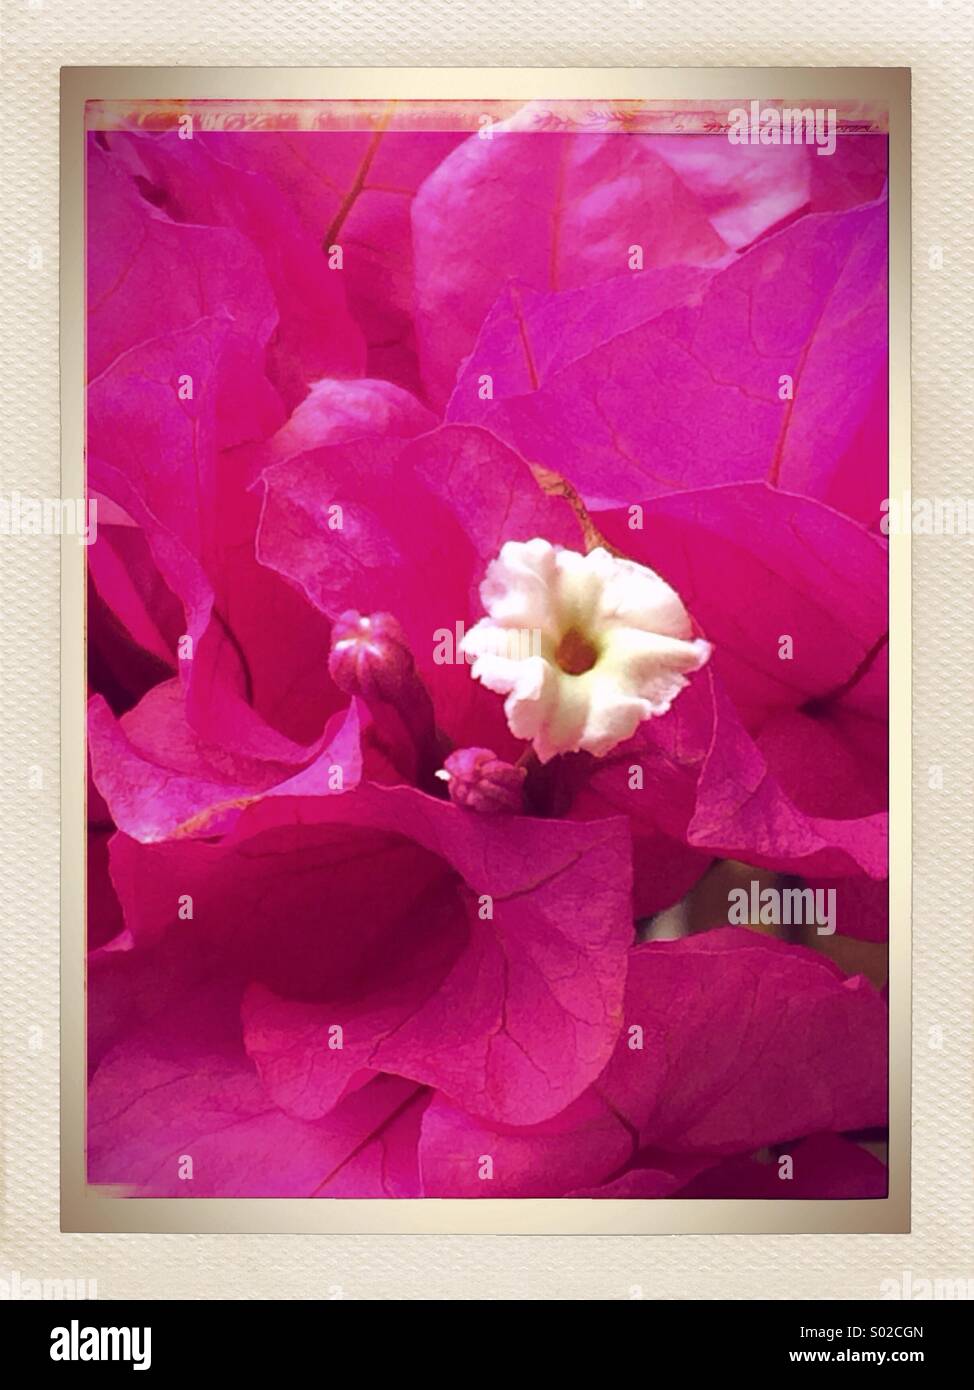 Bougainvillea Flowering Native South American Plant Stock Photo